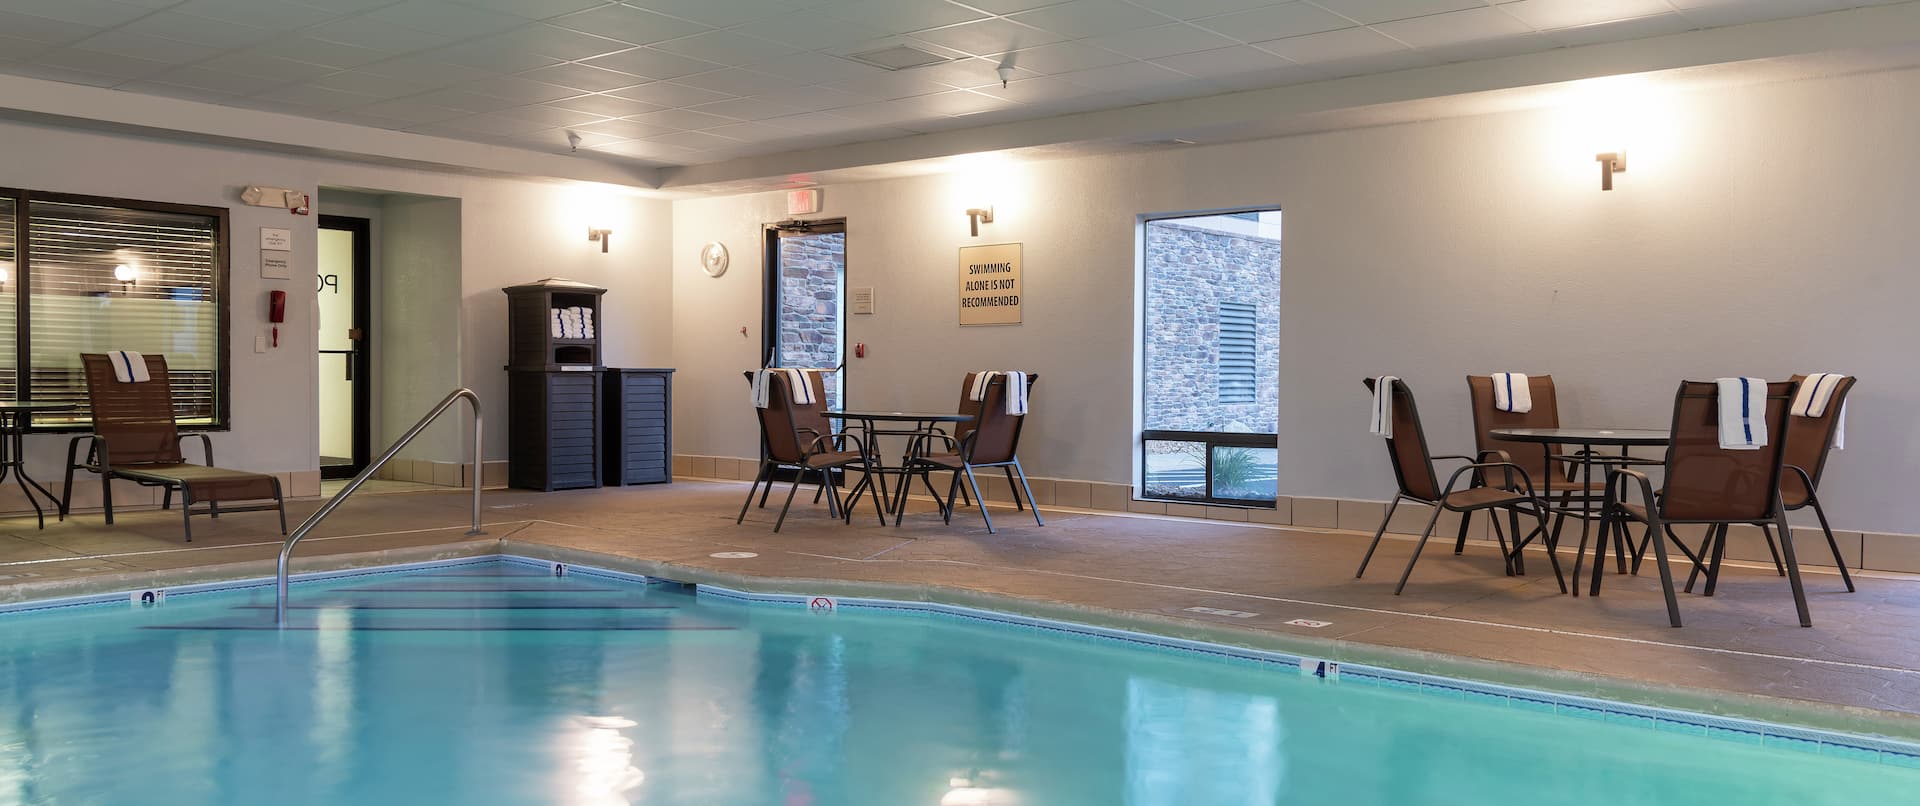 Indoor Pool With Chairs